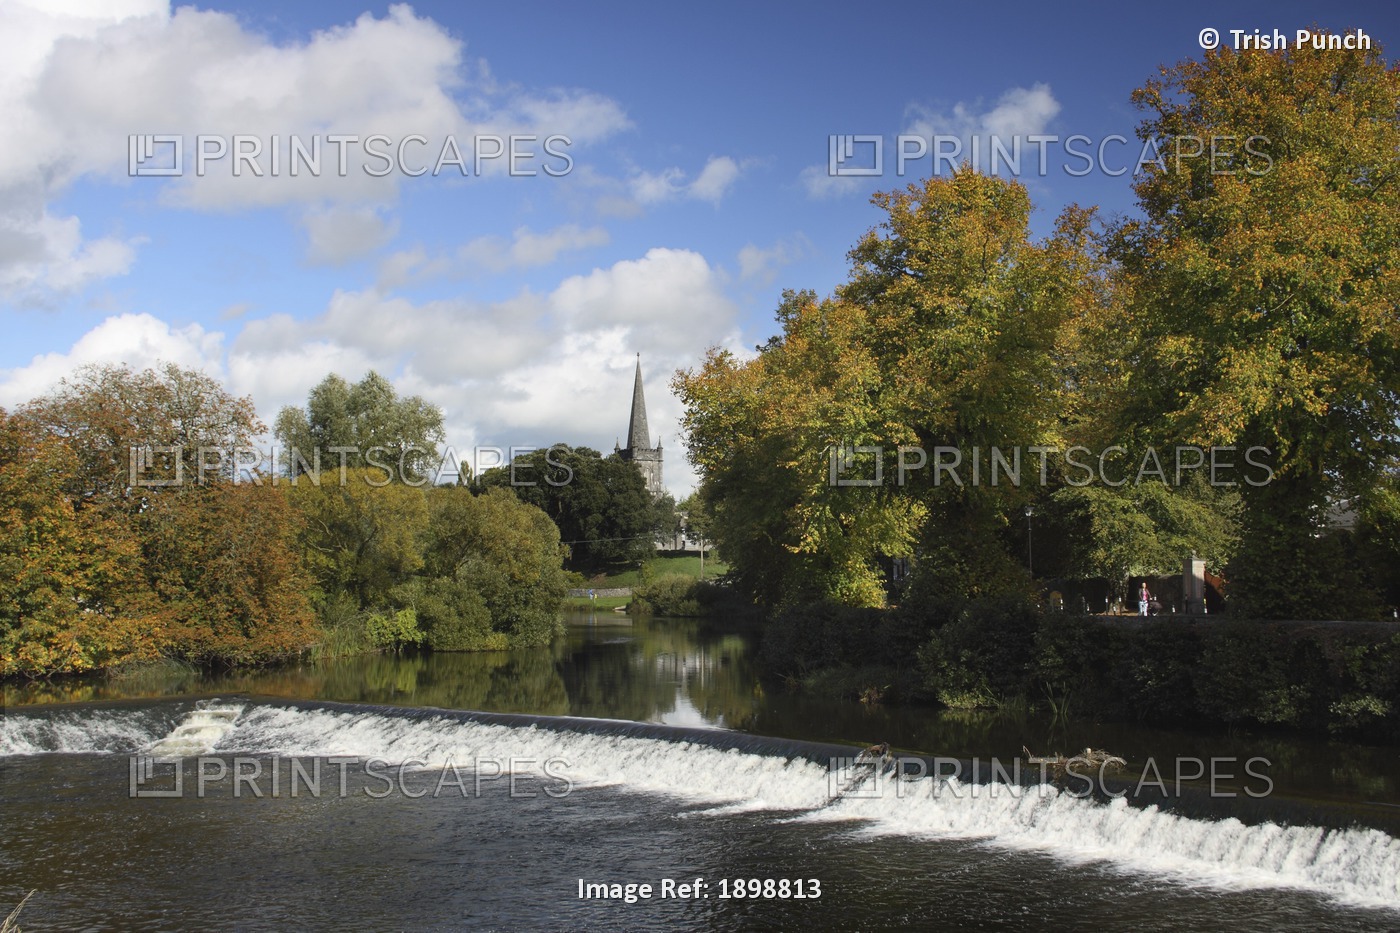 Water Flowing Over A Ledge In The River; Cahir, County Tipperary, Ireland